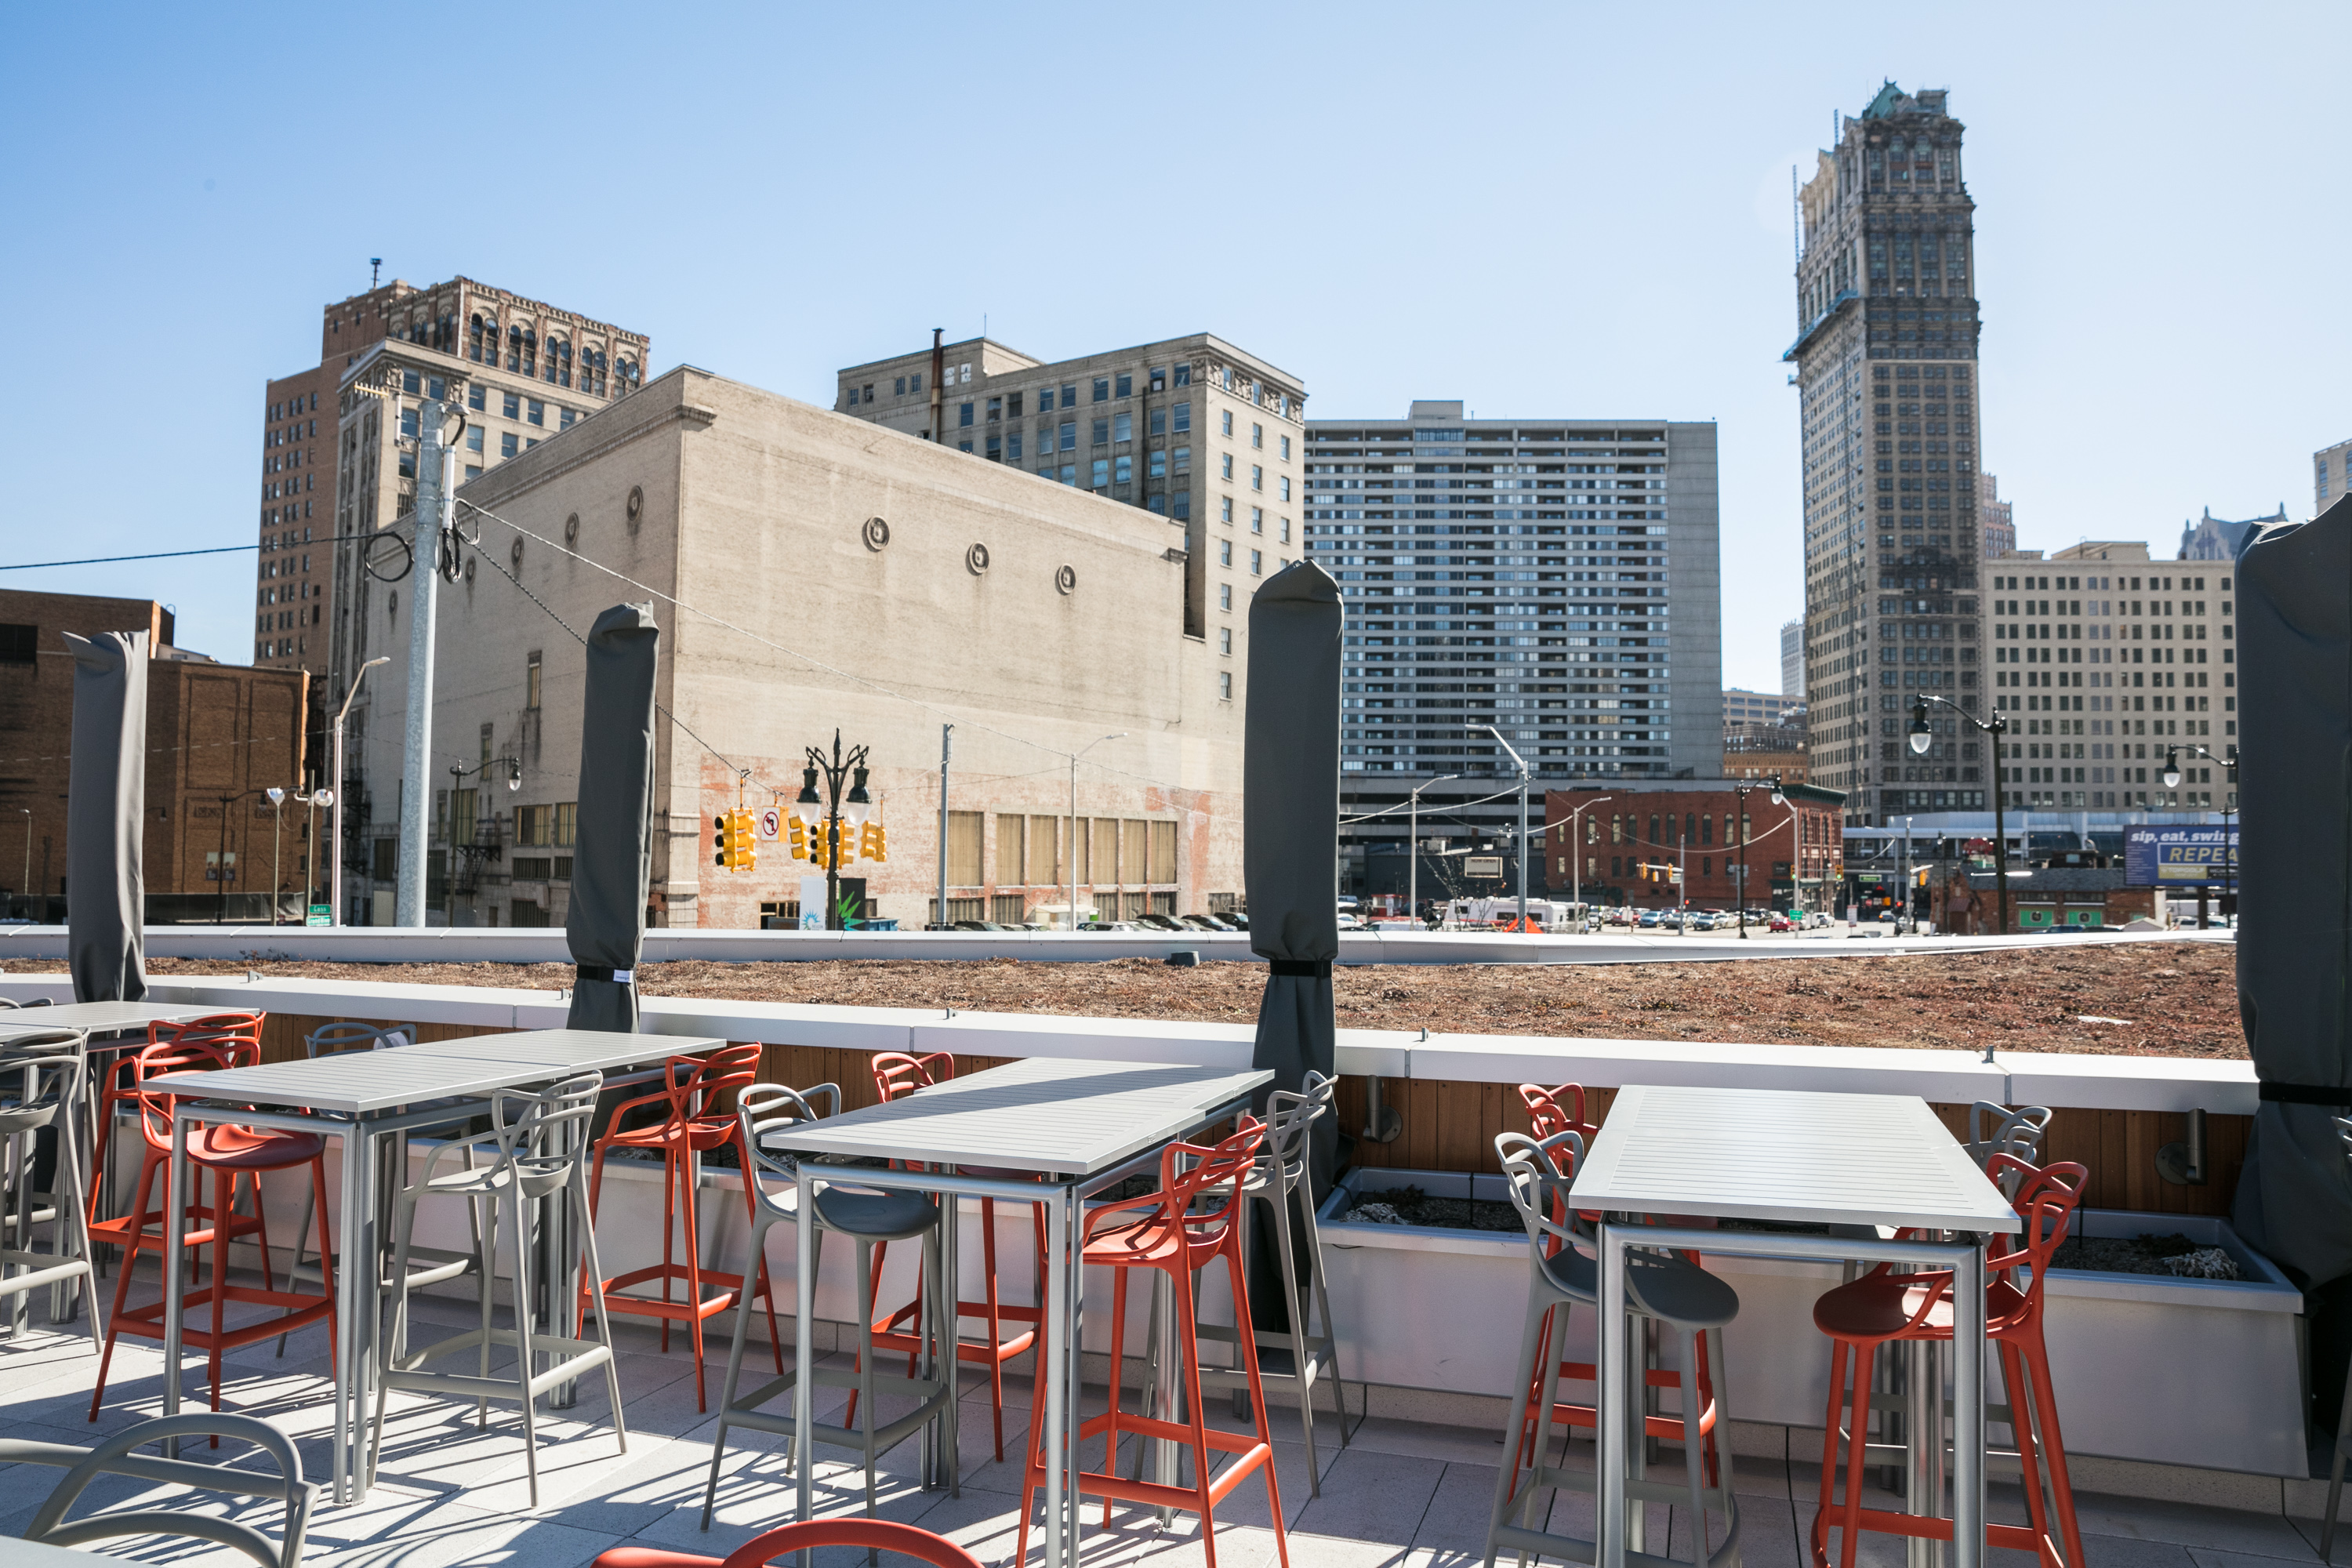 Rooftop building with tables and chairs shows views of downtown Detroit buildings